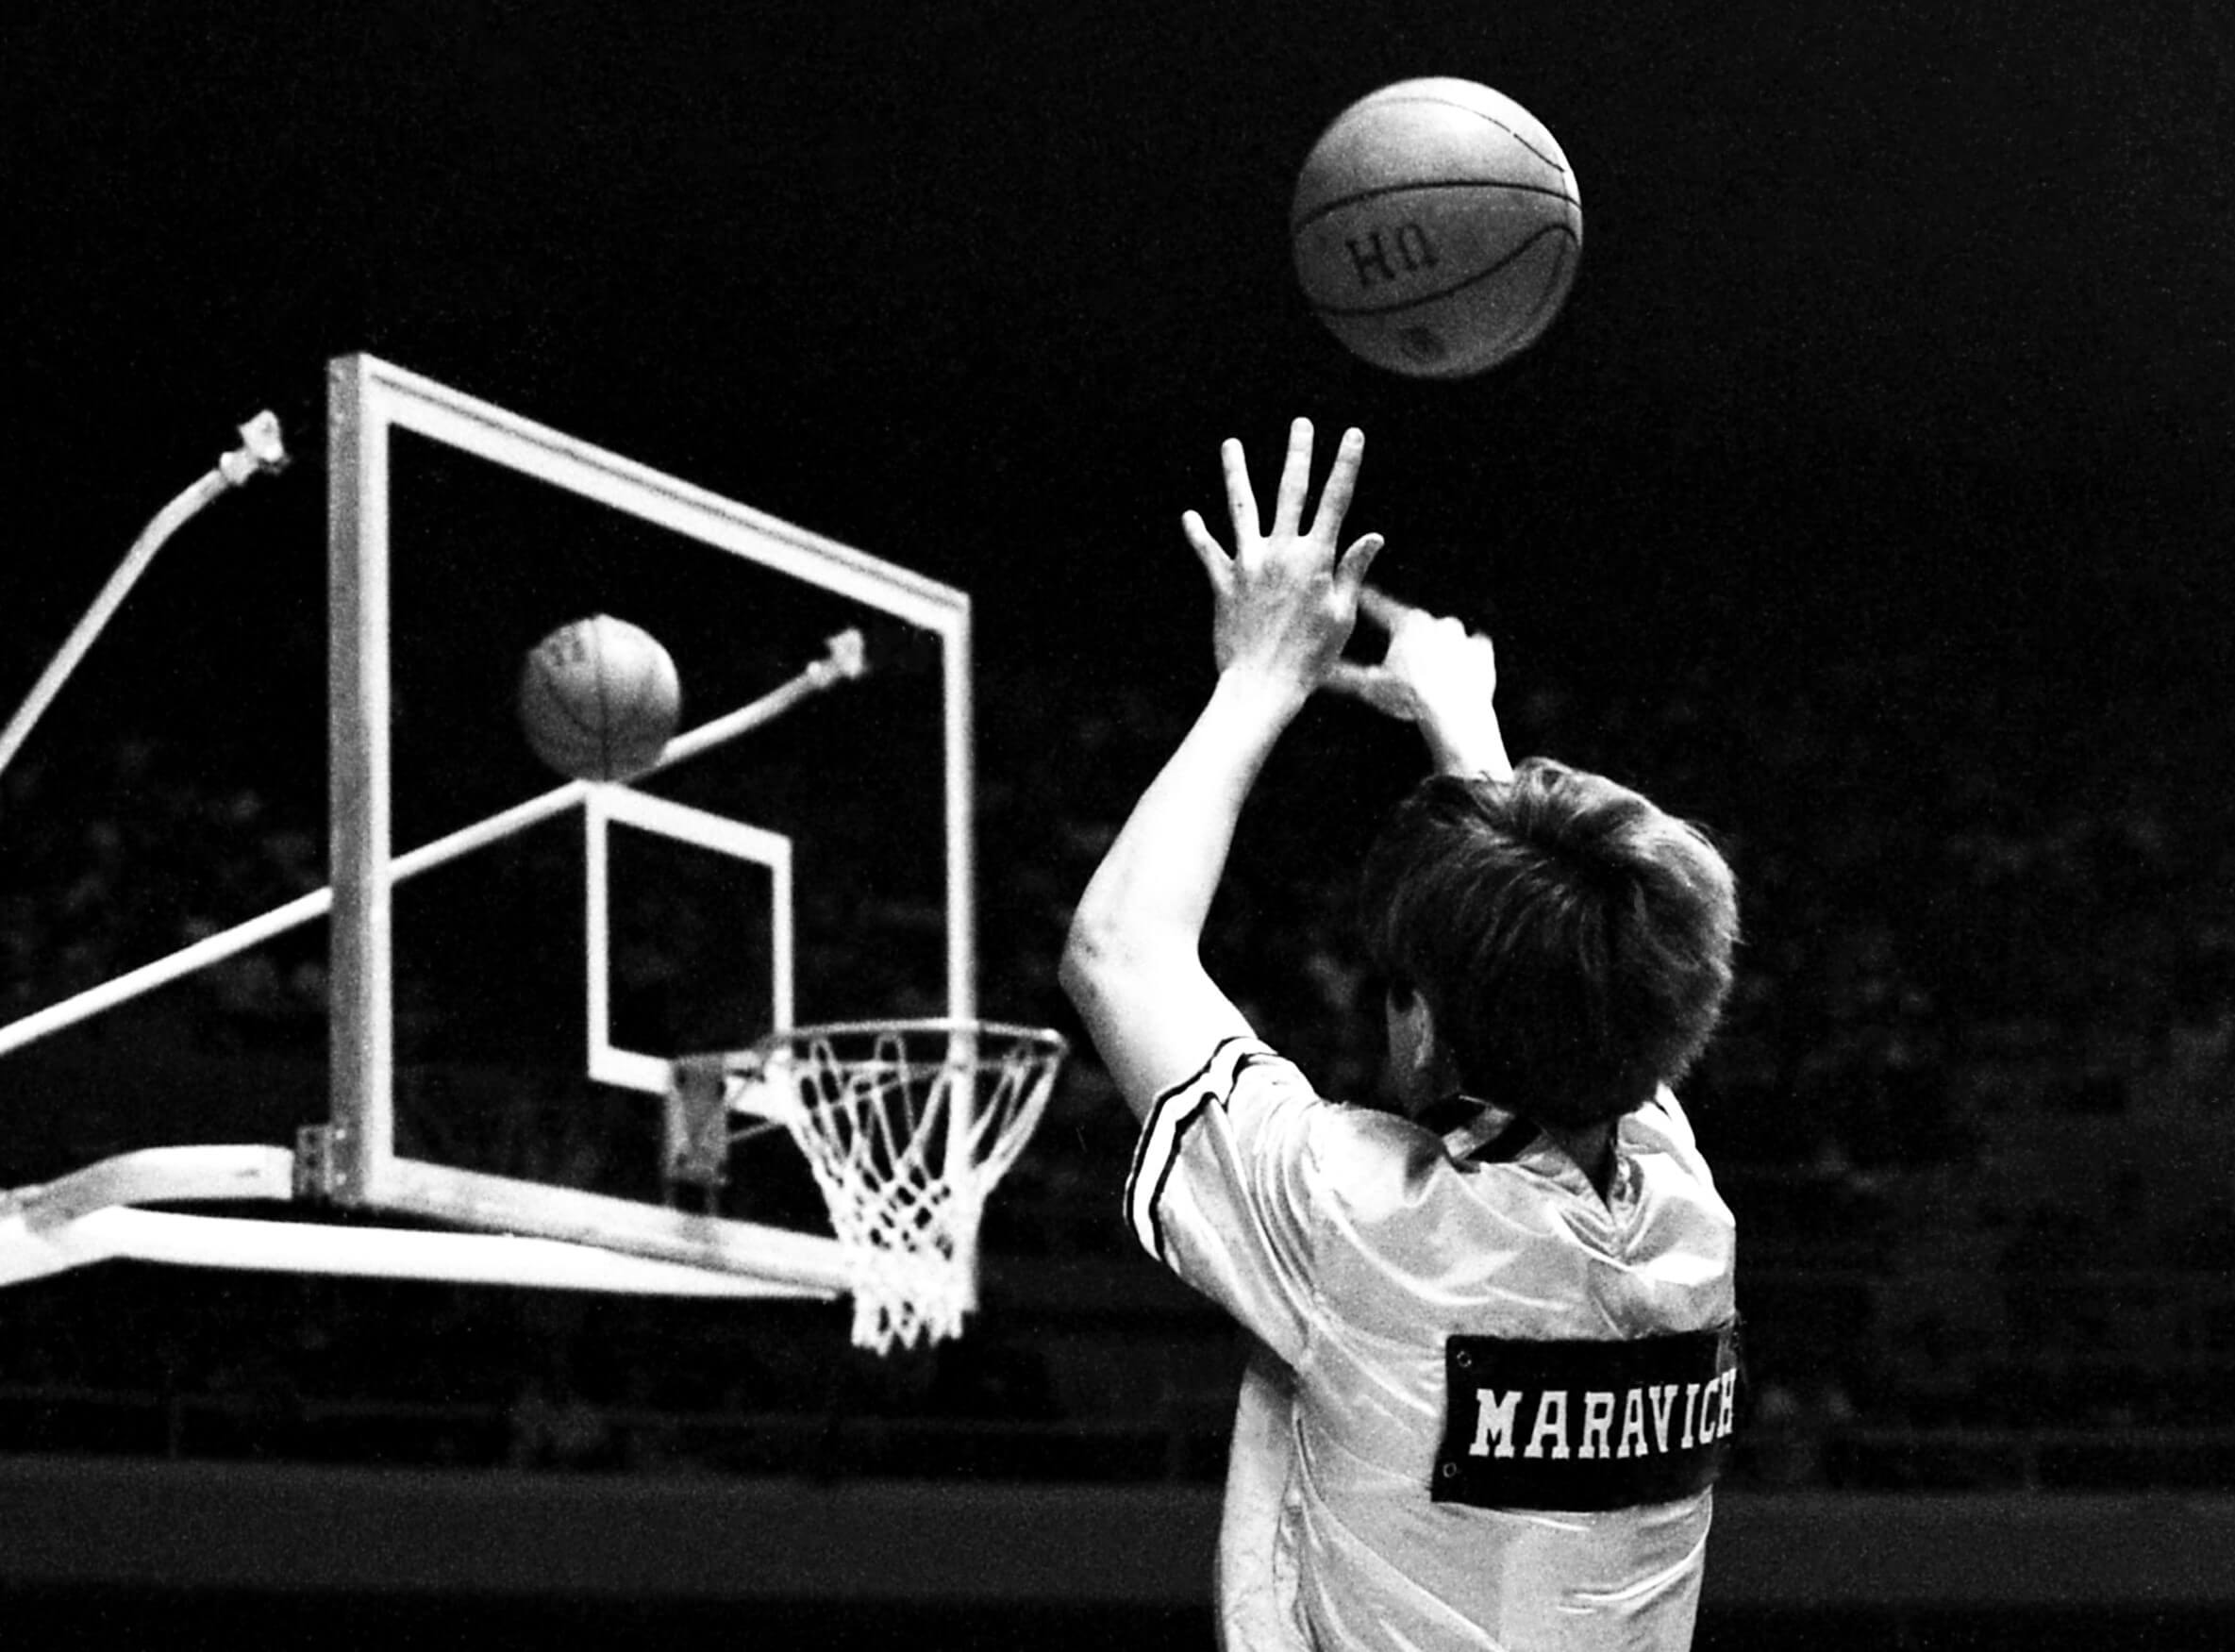 Pete Maravich Had 2 Goals Entering His Final Year at LSU and Had No Problem Achieving Both